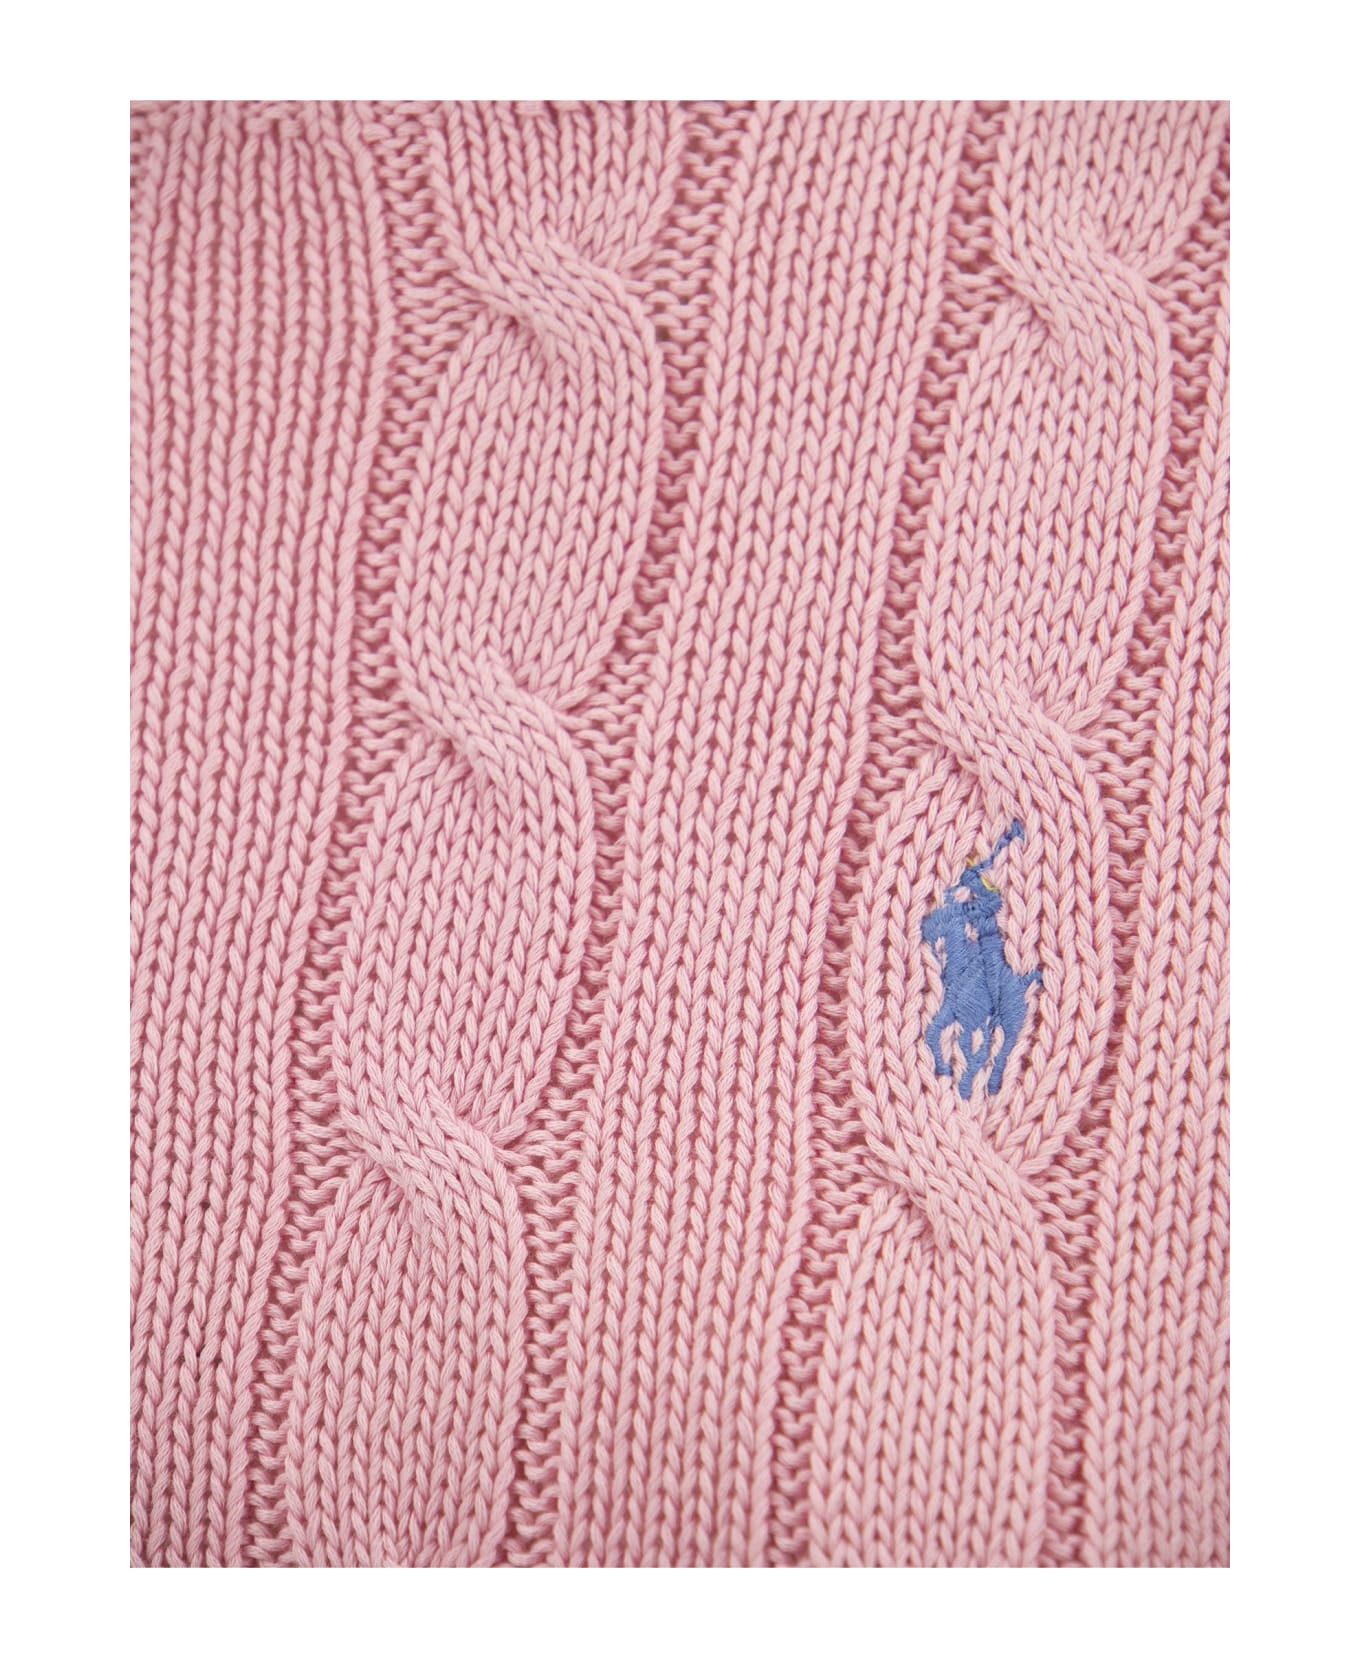 Polo Ralph Lauren Crew Neck Sweater In Pink Braided Knit - Pink ニットウェア